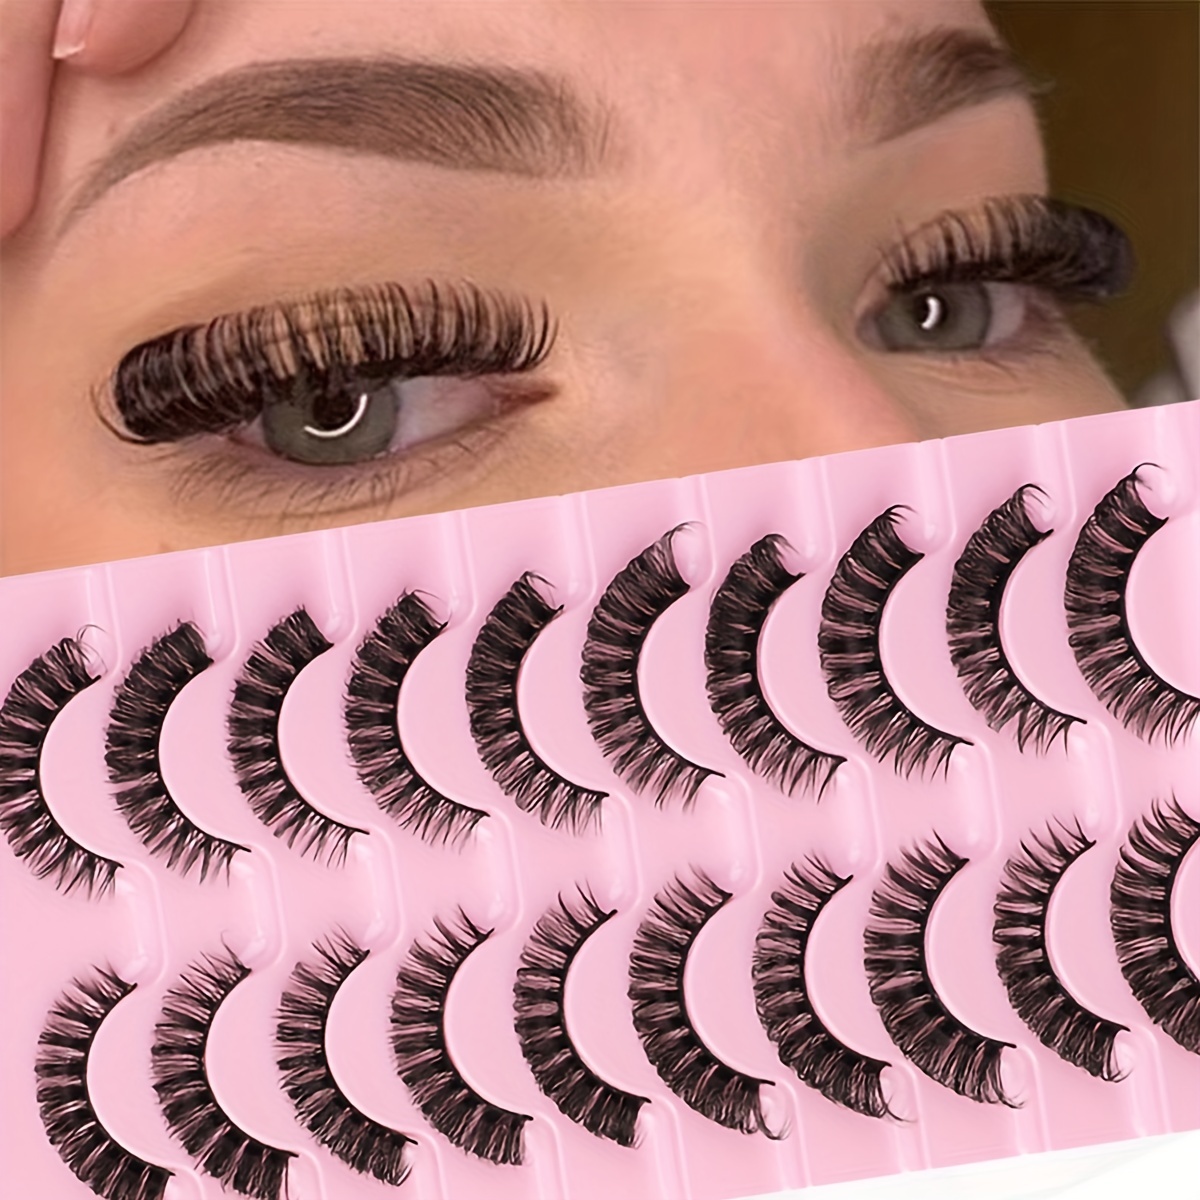 

10 Pairs Russian Strip Lashes Dd Curl False Eyelashes Fluffy Wispy Faux Mink Lashes Pack